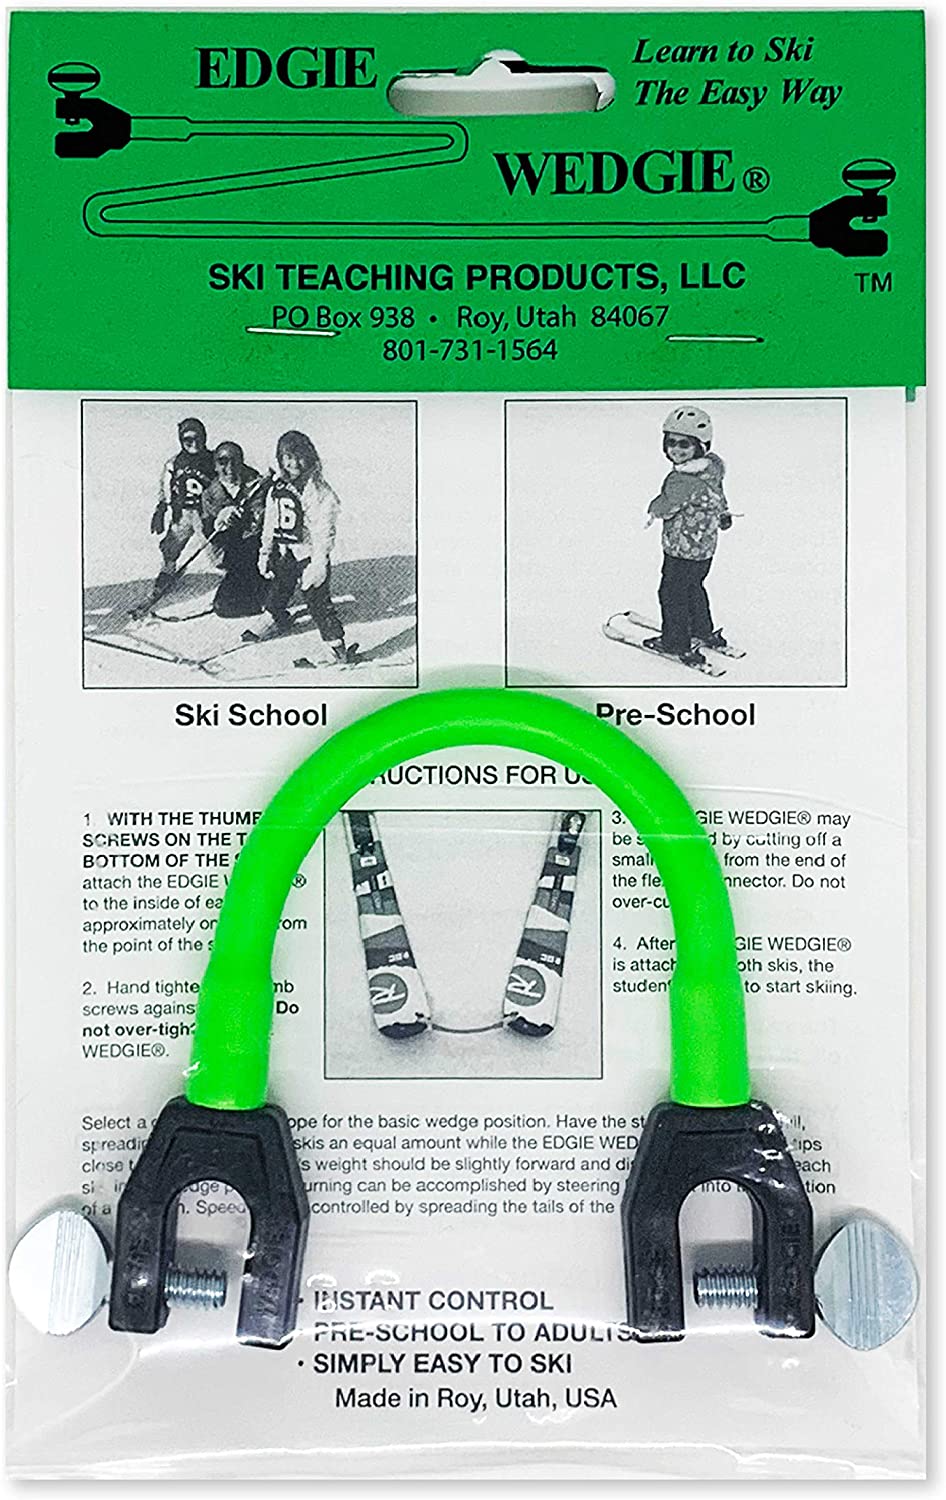 Edgie Wedgie connects ski tips together - Great for beginner skiers